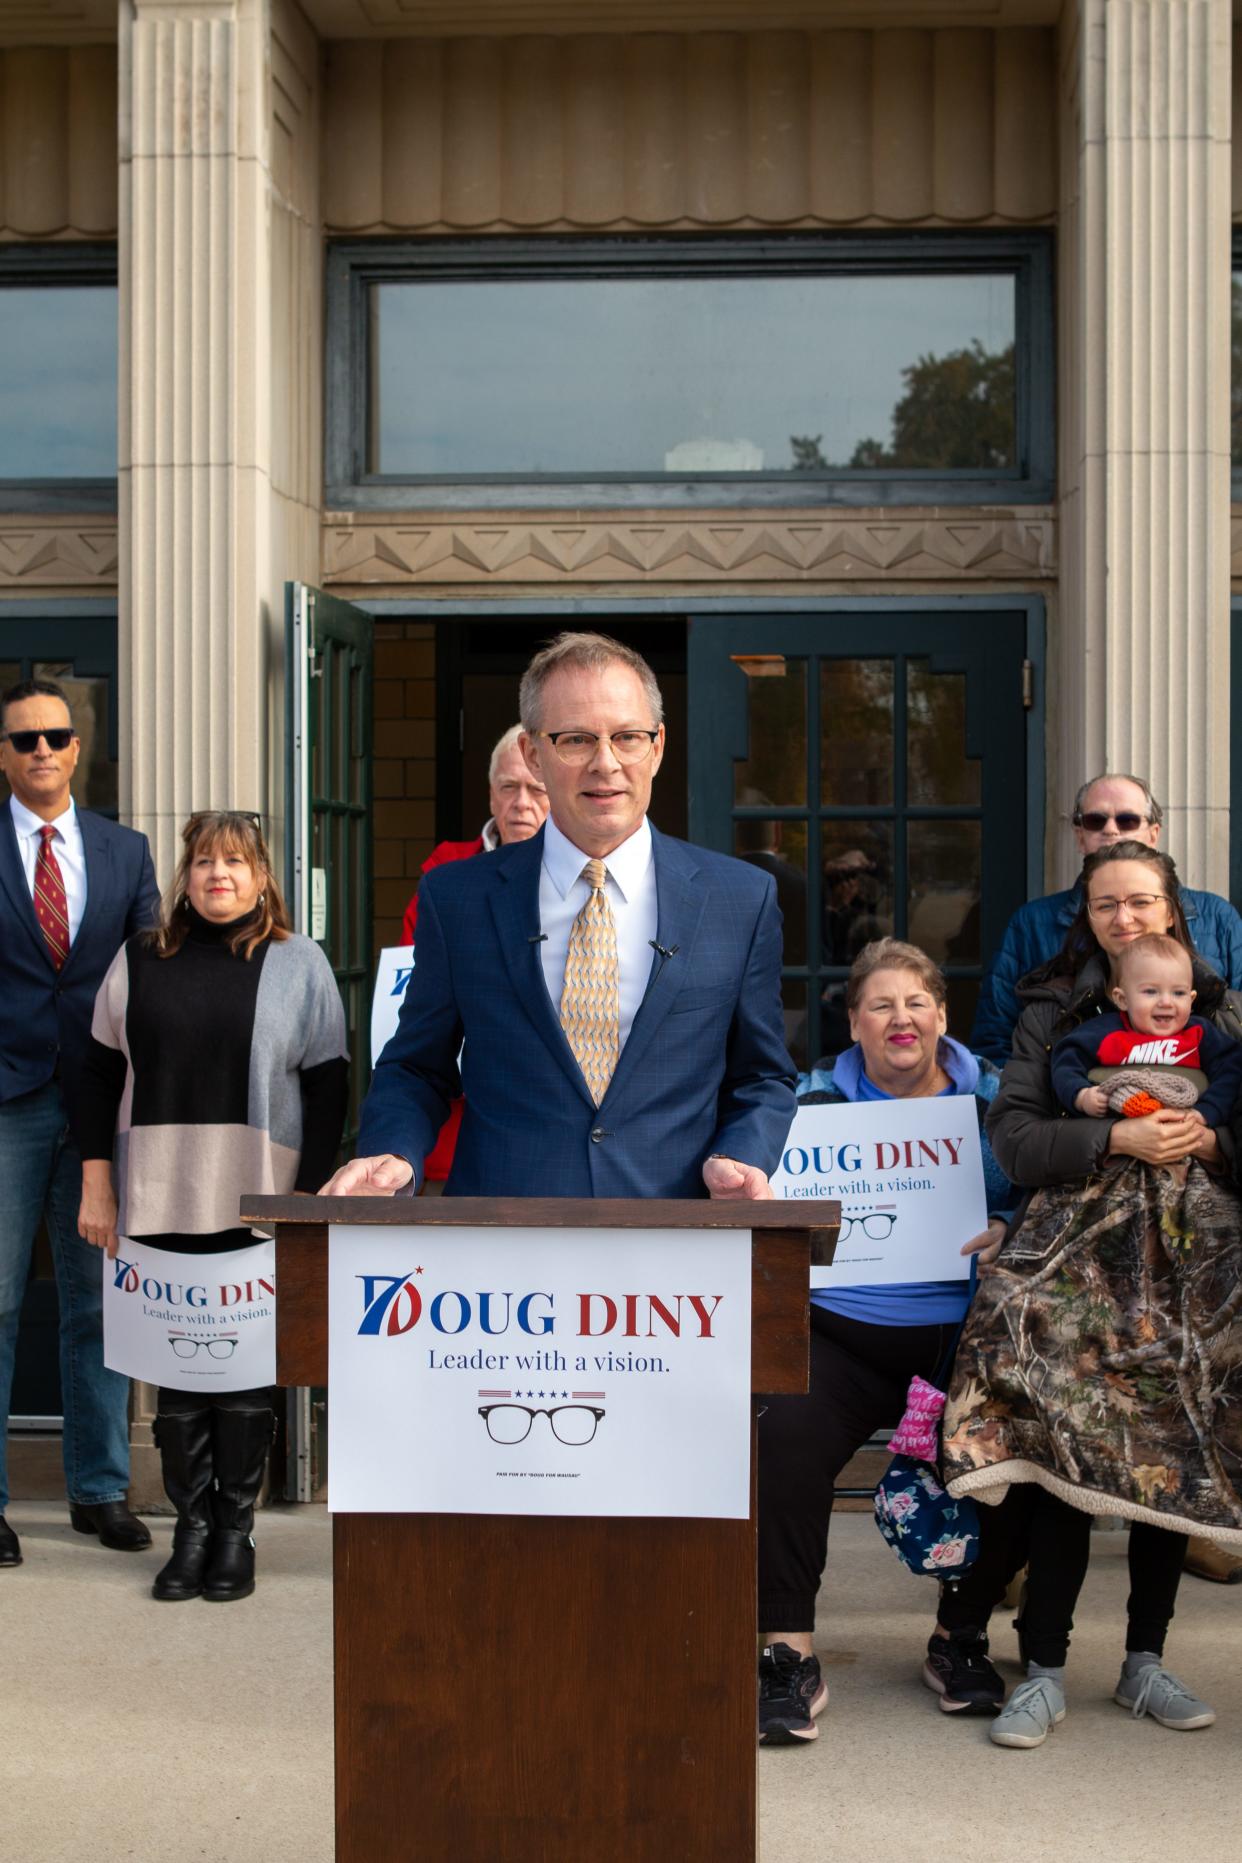 District 4 alderperson Doug Diny announces his candidacy for mayor Wednesday in front of East High Apartments in Wausau.